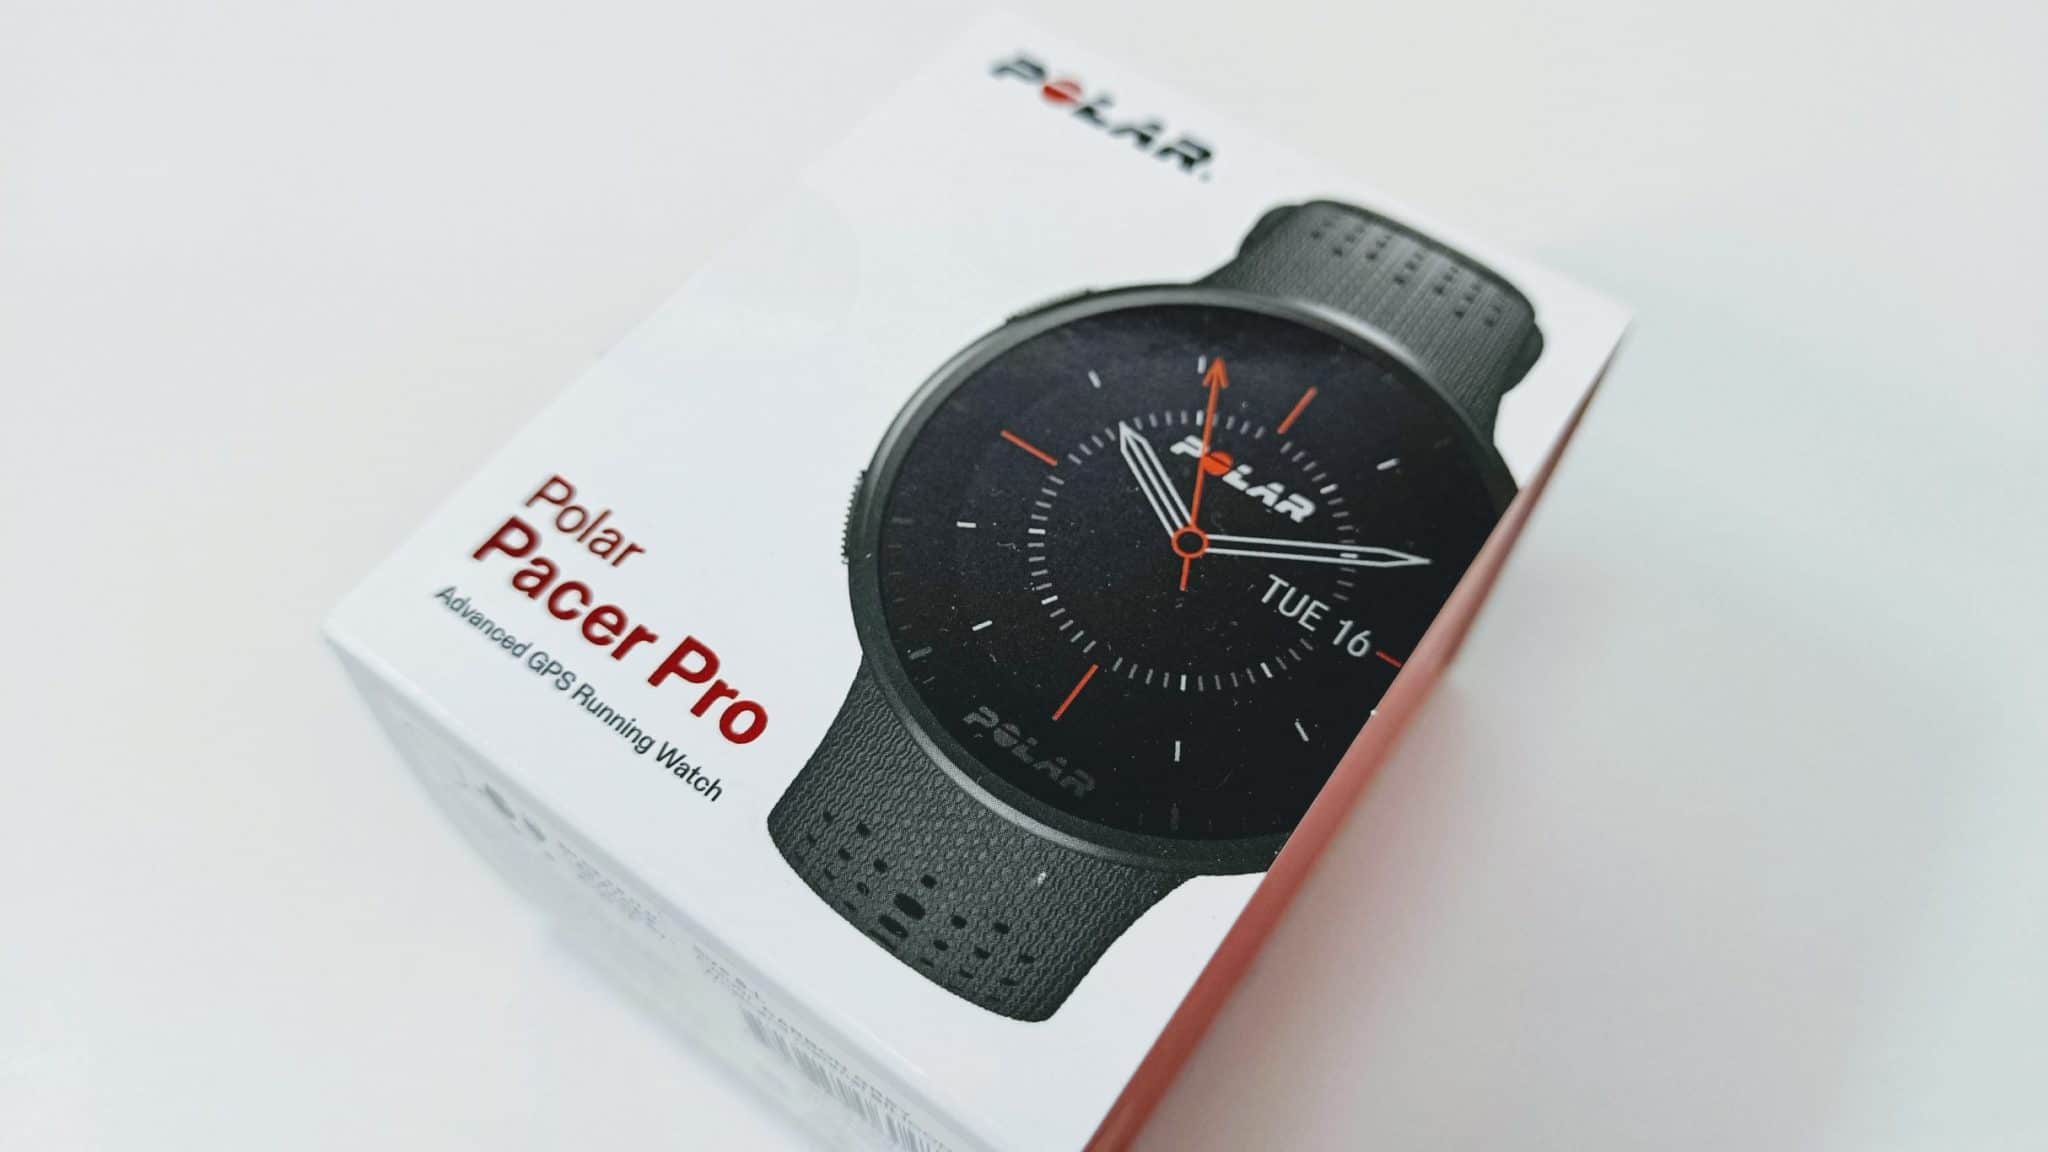 Polar targets serious runners with Pacer Pro smartwatch